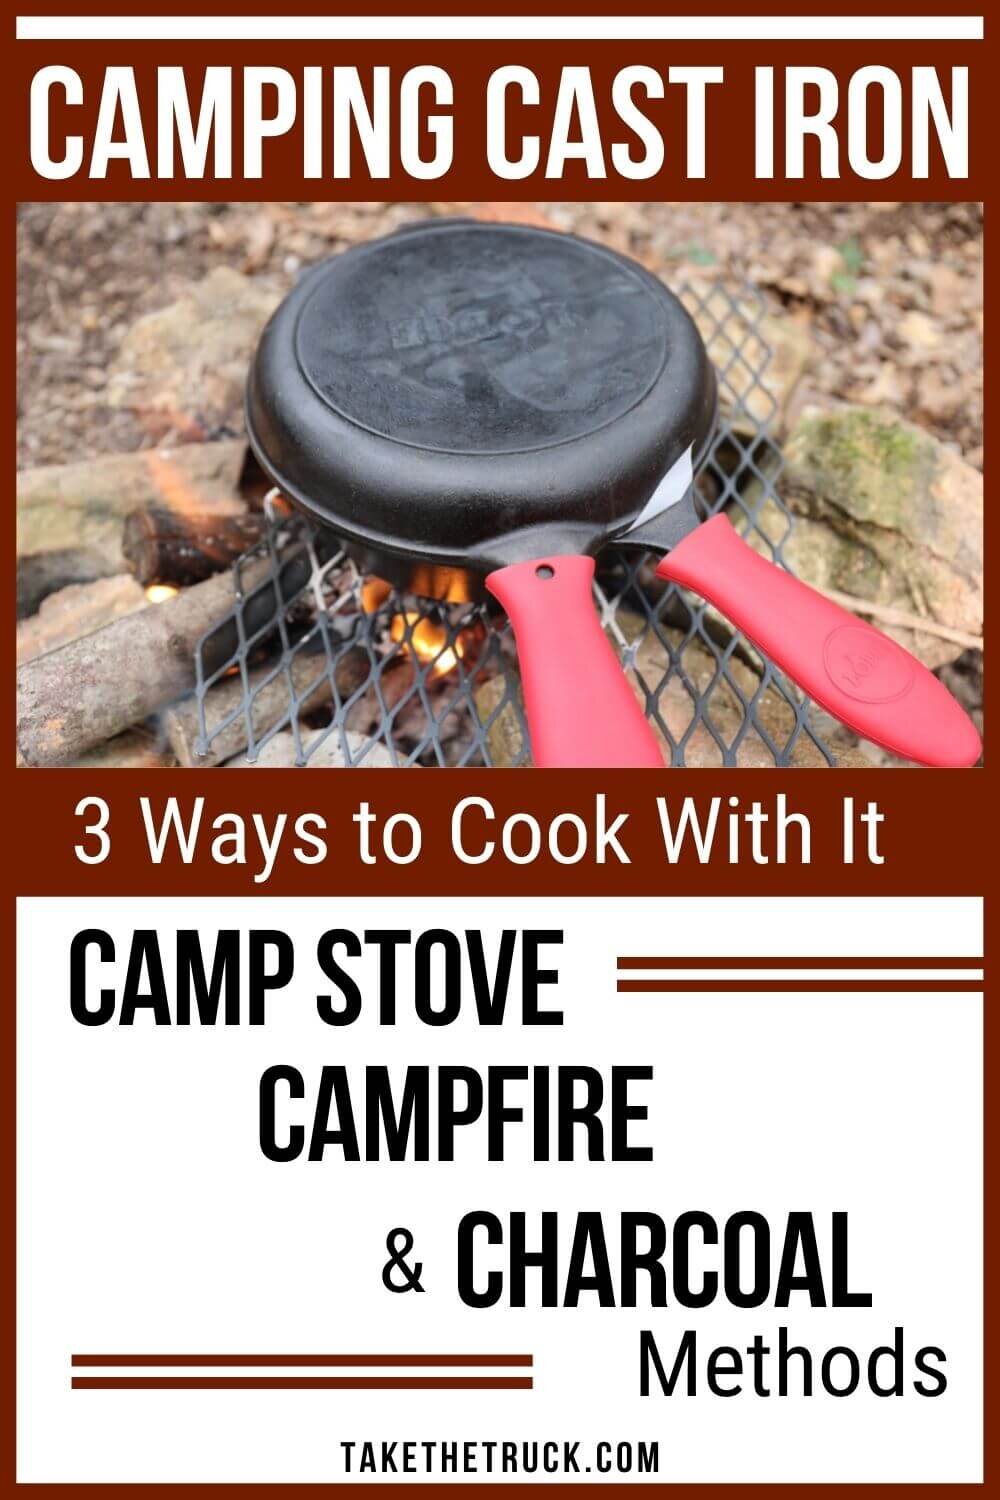 Camping with Cast Iron Pans – Stovetop, Charcoal, or Campfire?